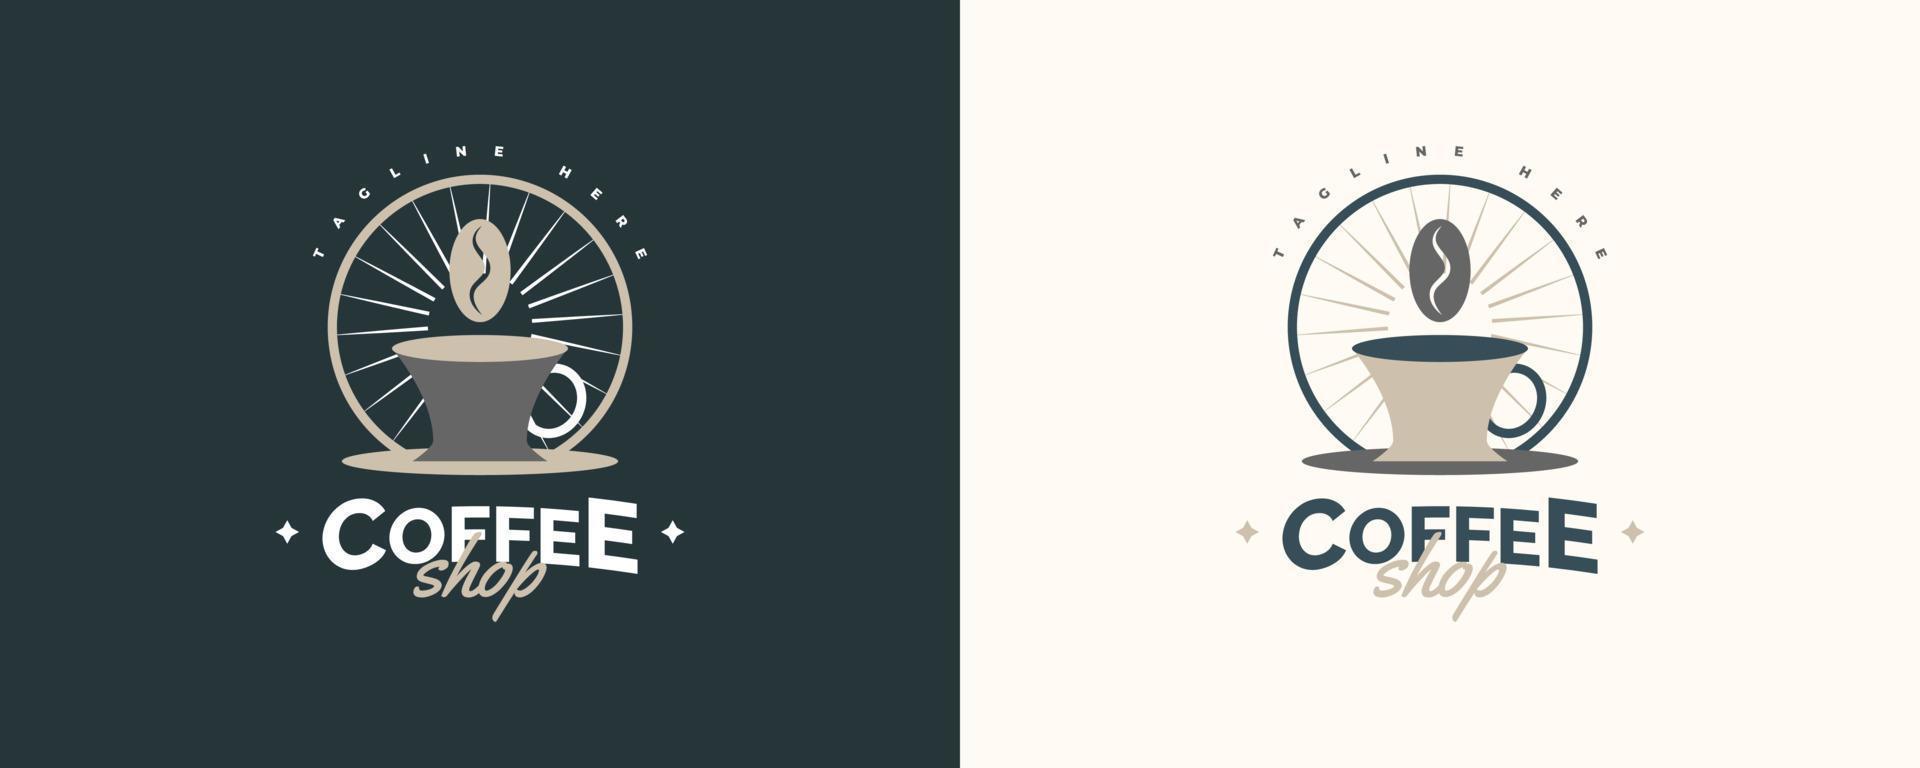 Vintage and Minimal Coffee Shop Logo. Cafe Logo or Emblem with Retro Style vector